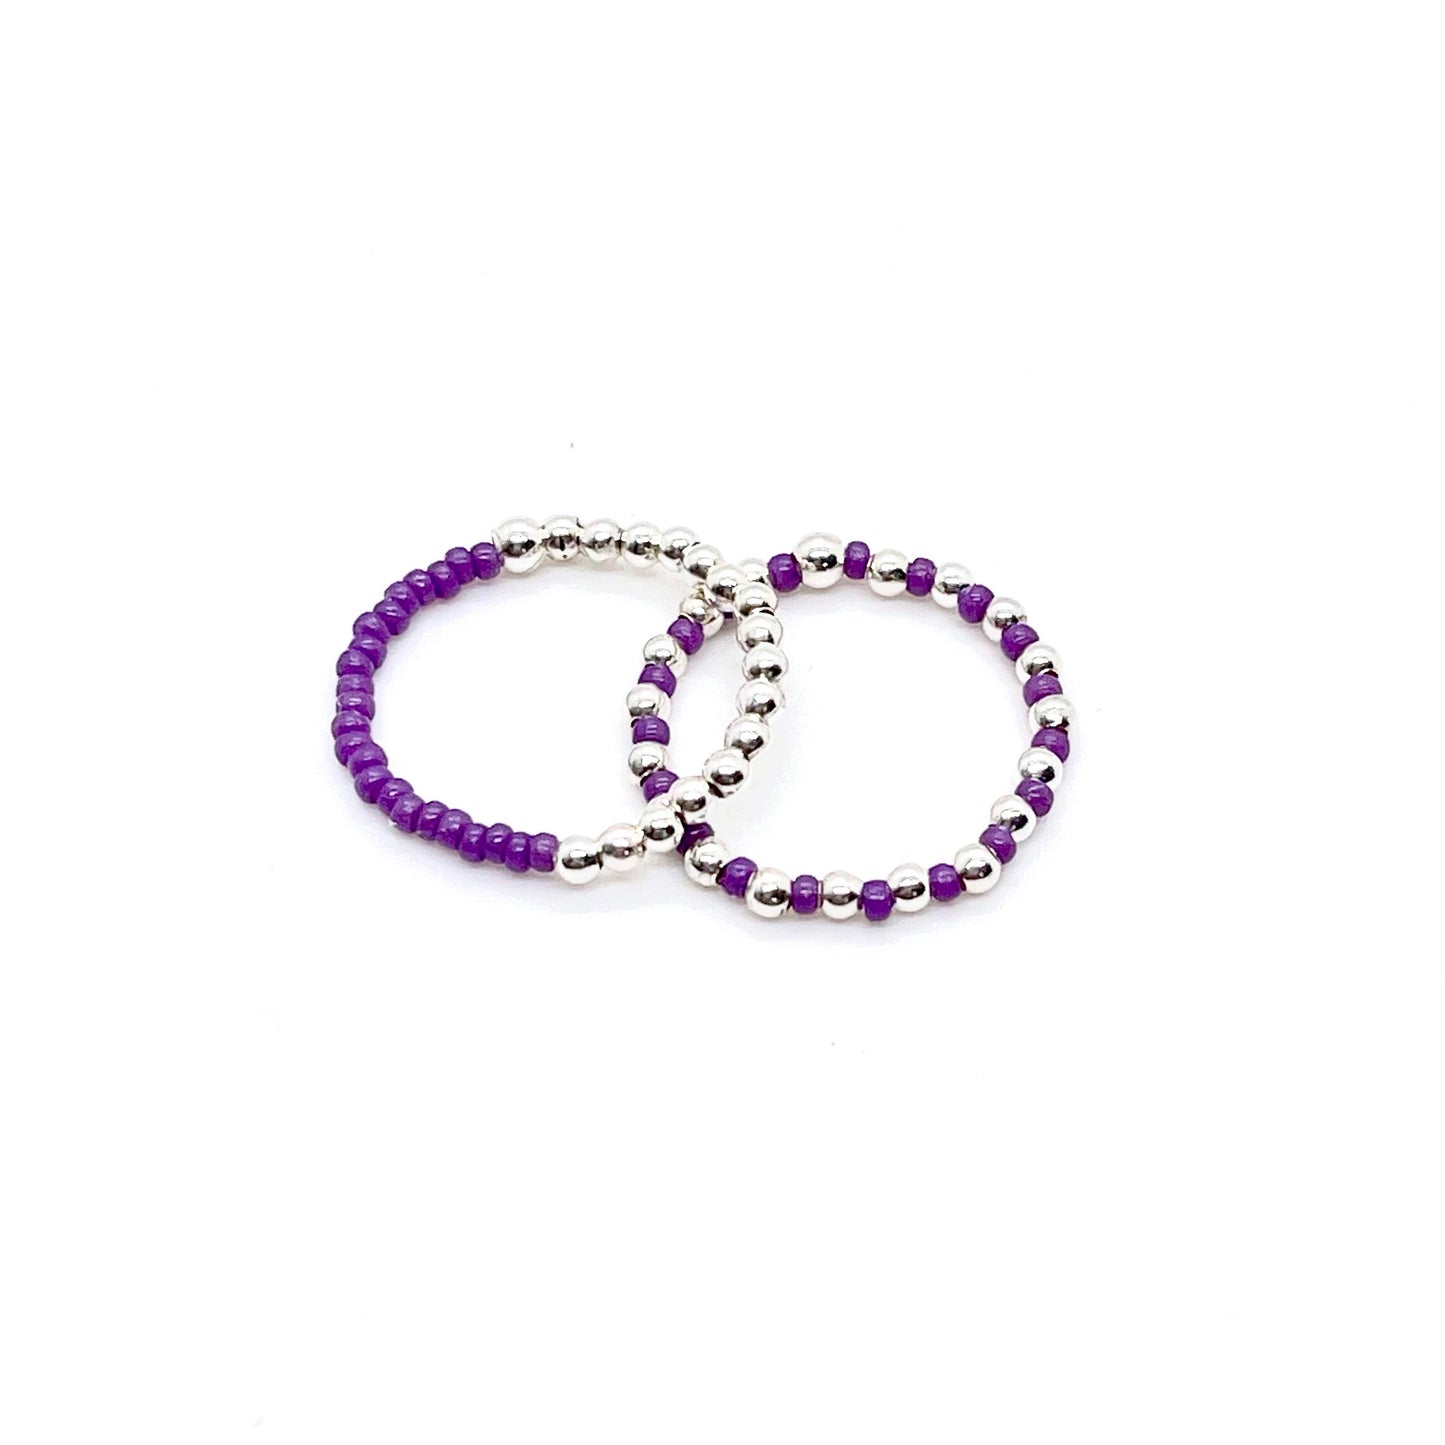 Stretch ring set with purple color block and seed beads alternating with 2mm sterling silver balls on stretch cord.